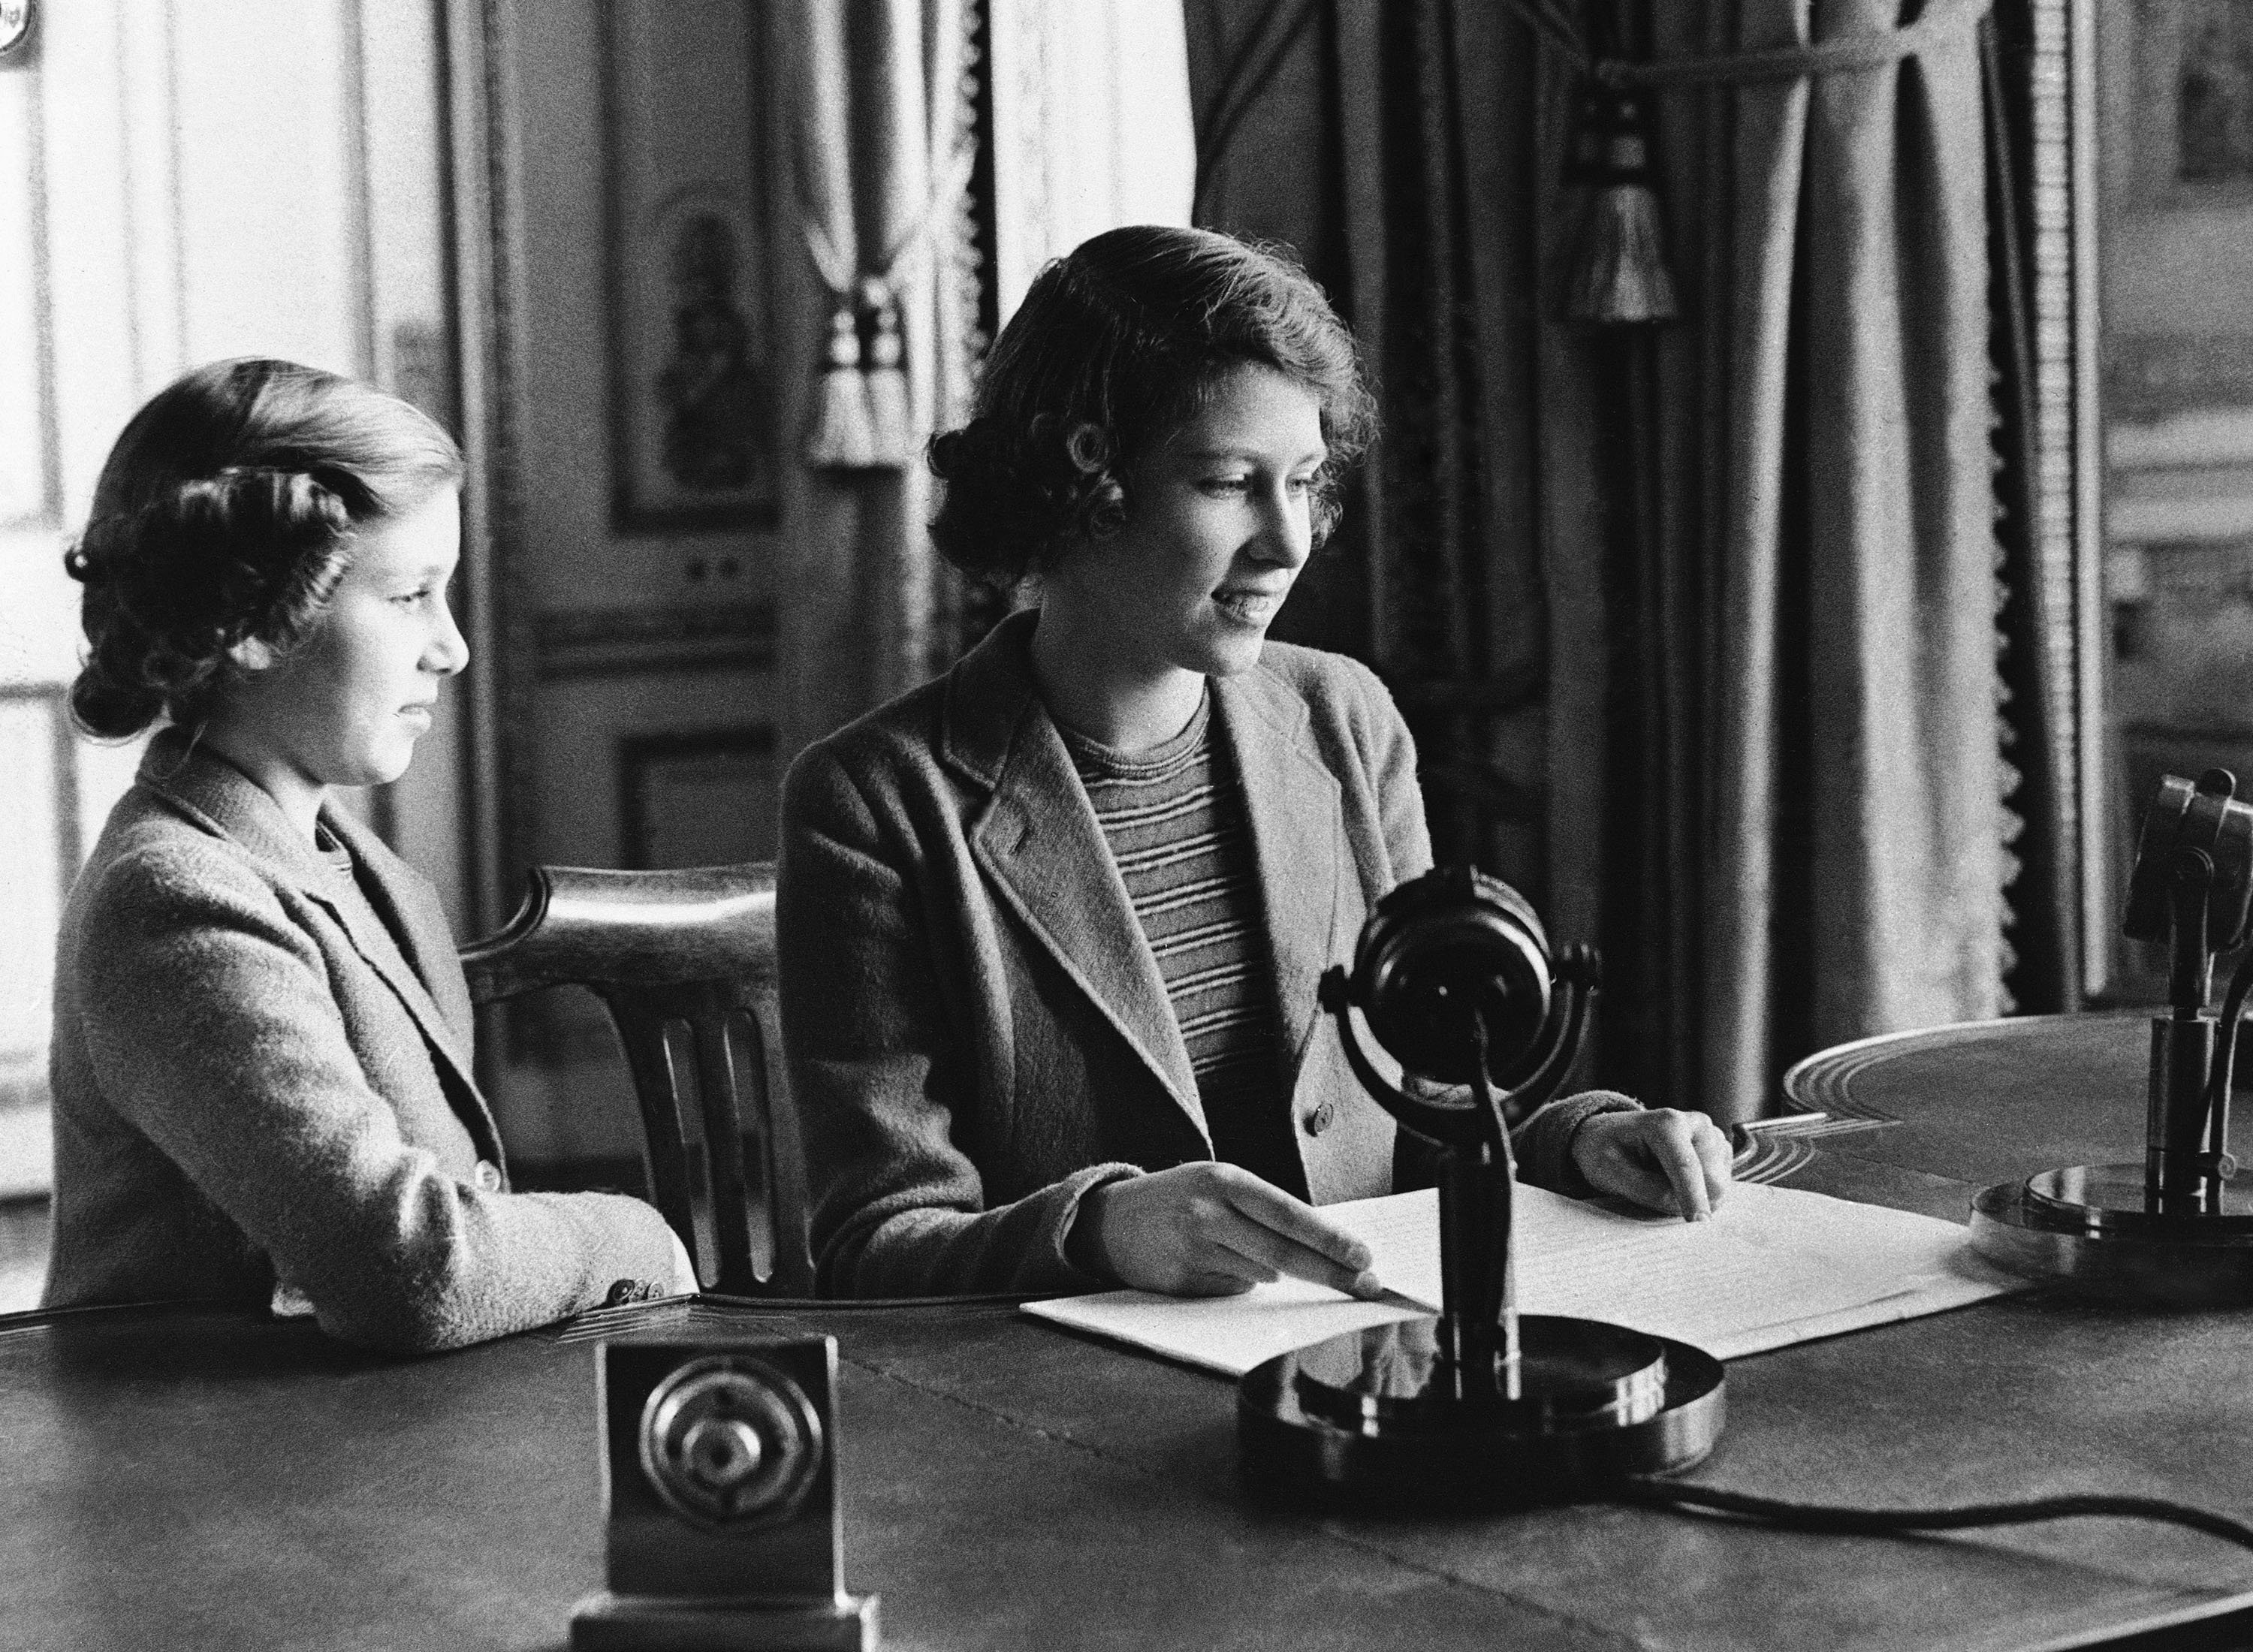 Princess Elizabeth (R), 14-year-old heiress apparent to the British throne, broadcasts a three-minute speech to British girls and boys evacuated overseas with her sister Margaret standing beside her, in London, U.K., Oct. 22, 1940. (AP Photo)